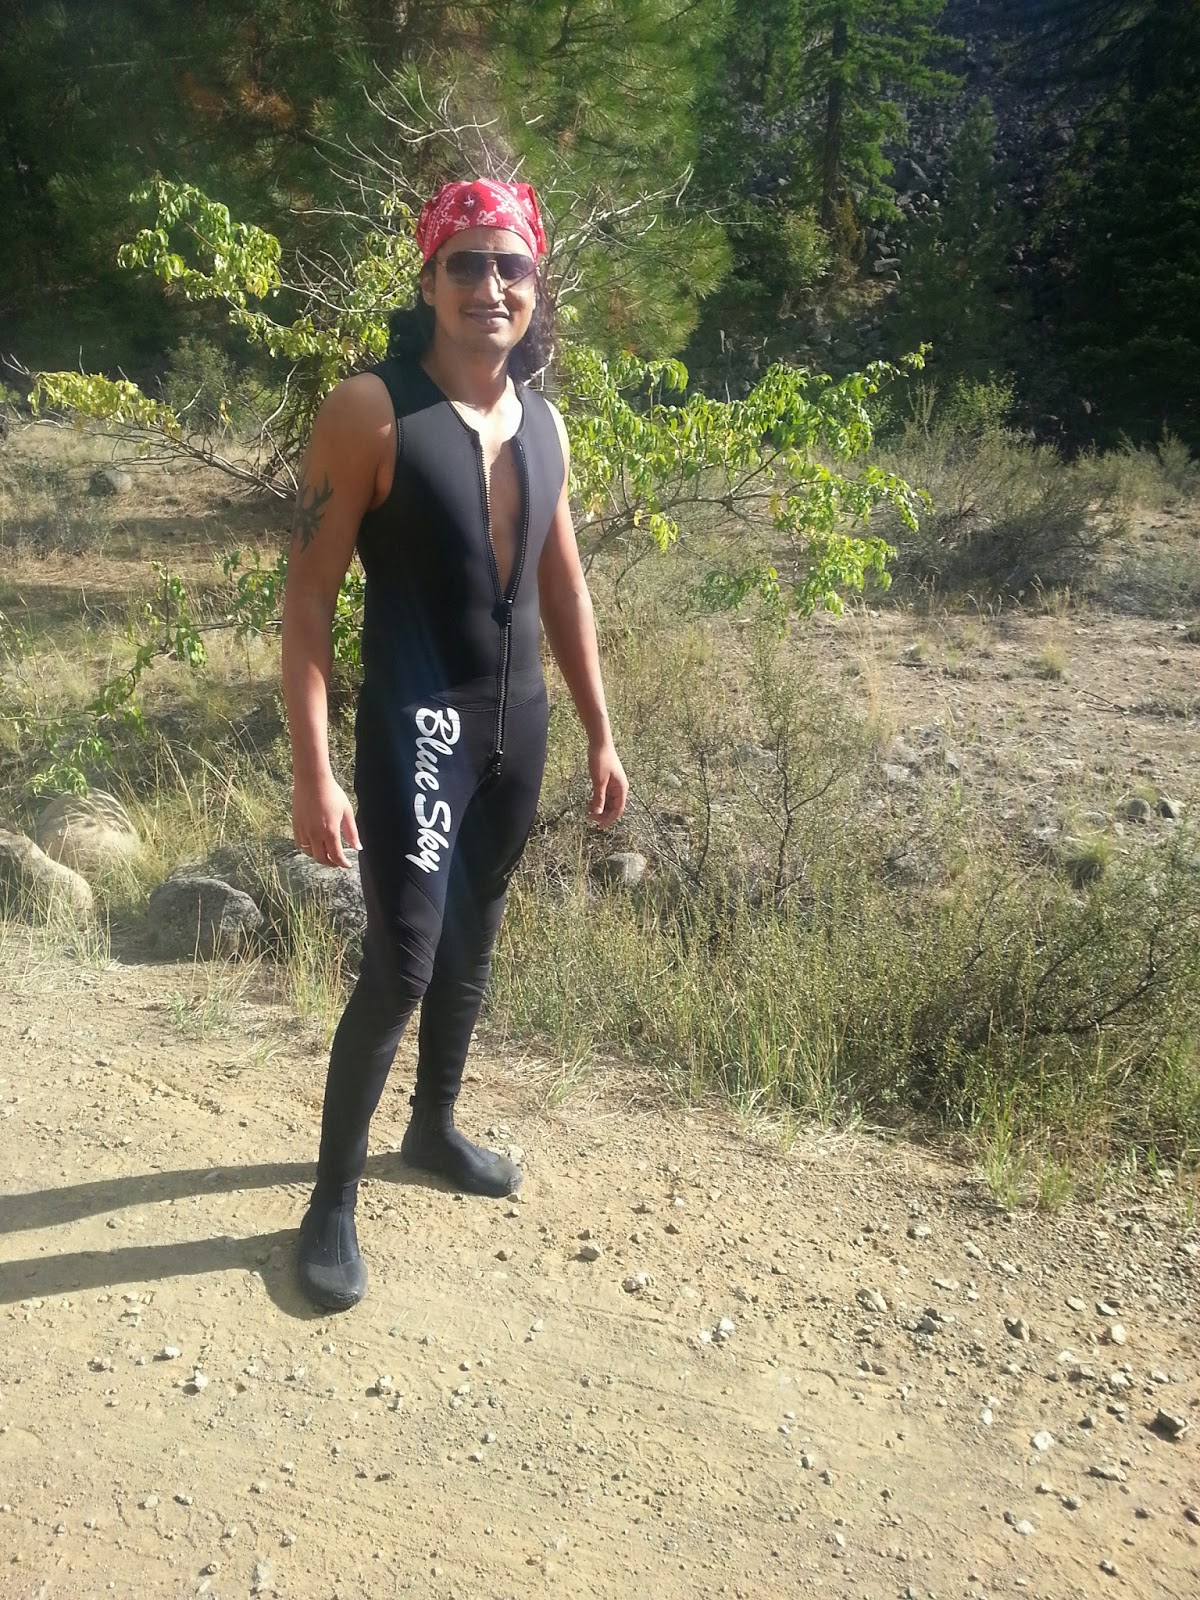 Best Rafting experience, Indian family outings in USA, Things to do near Seattle, Man in black wet suits